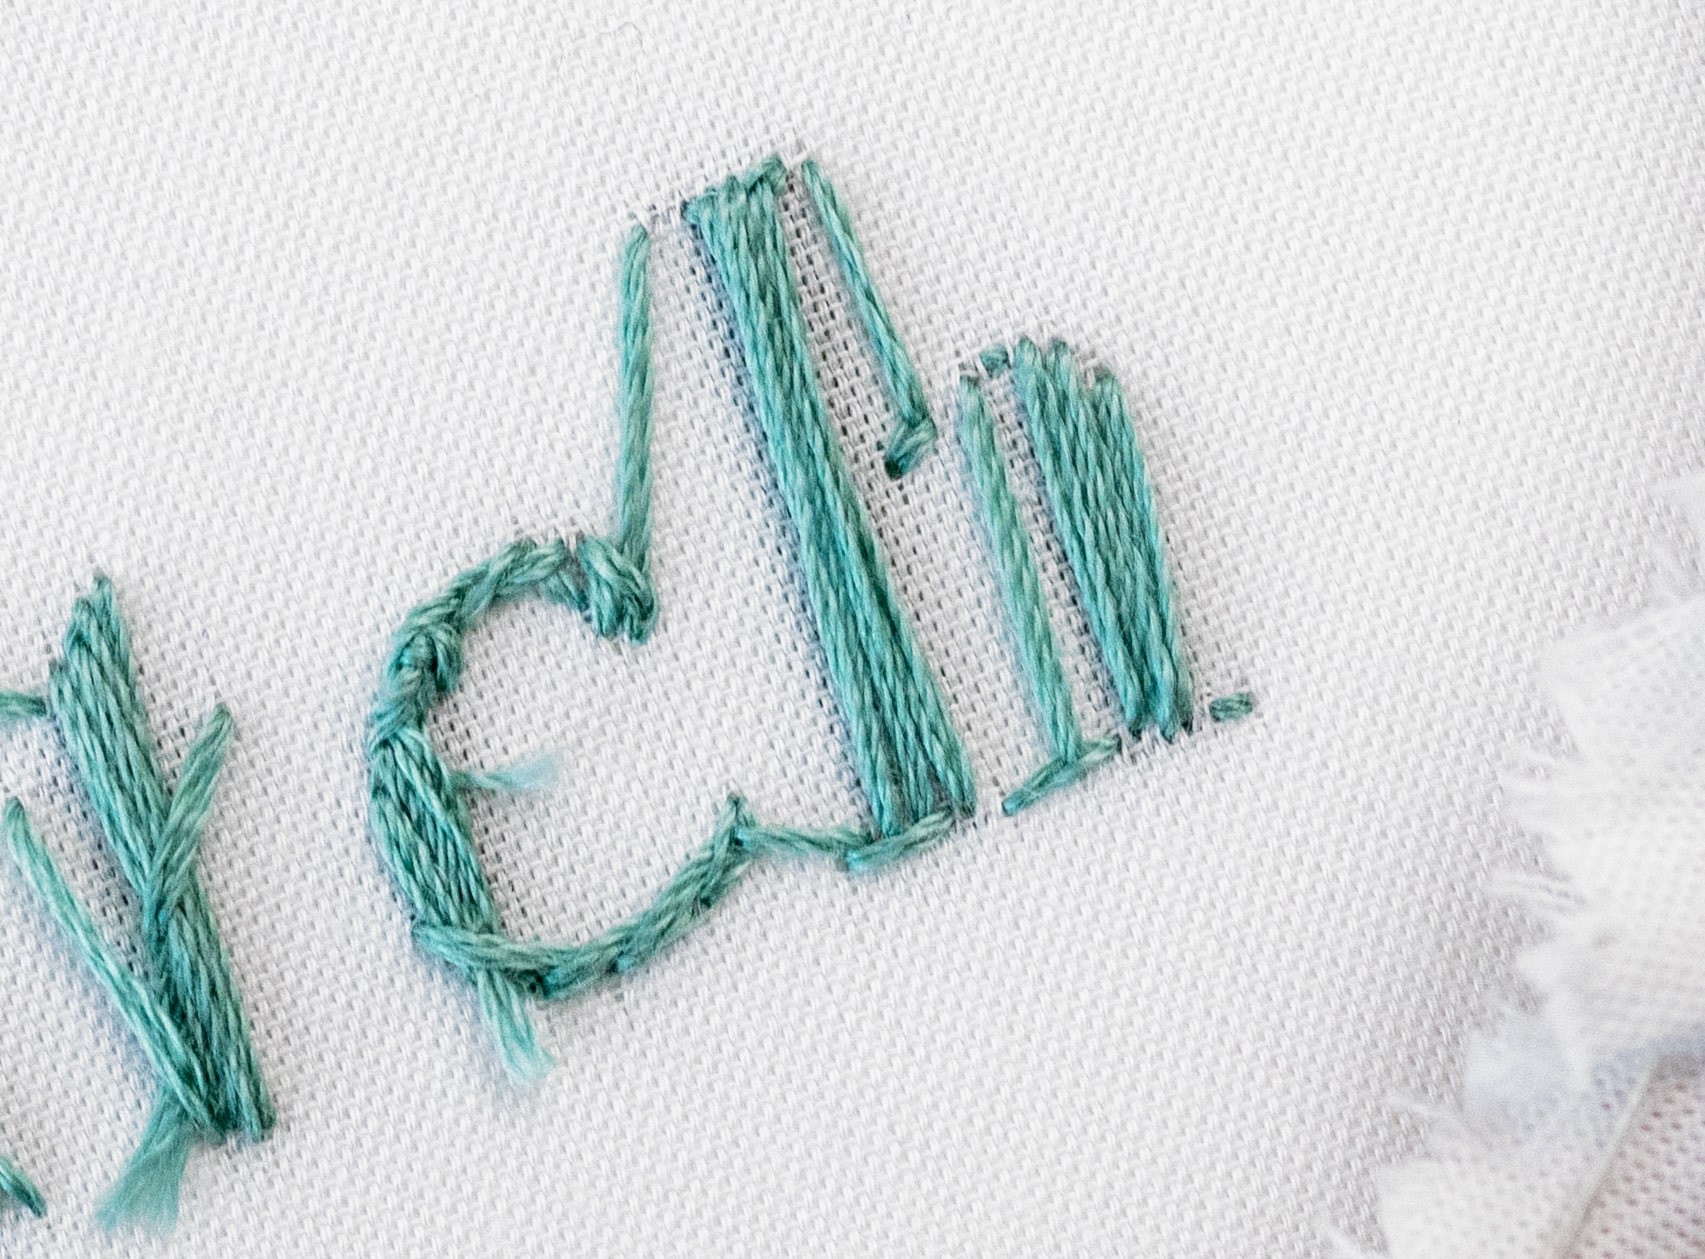 The word 'satin stitch' is stitched using satin stitch from behind.